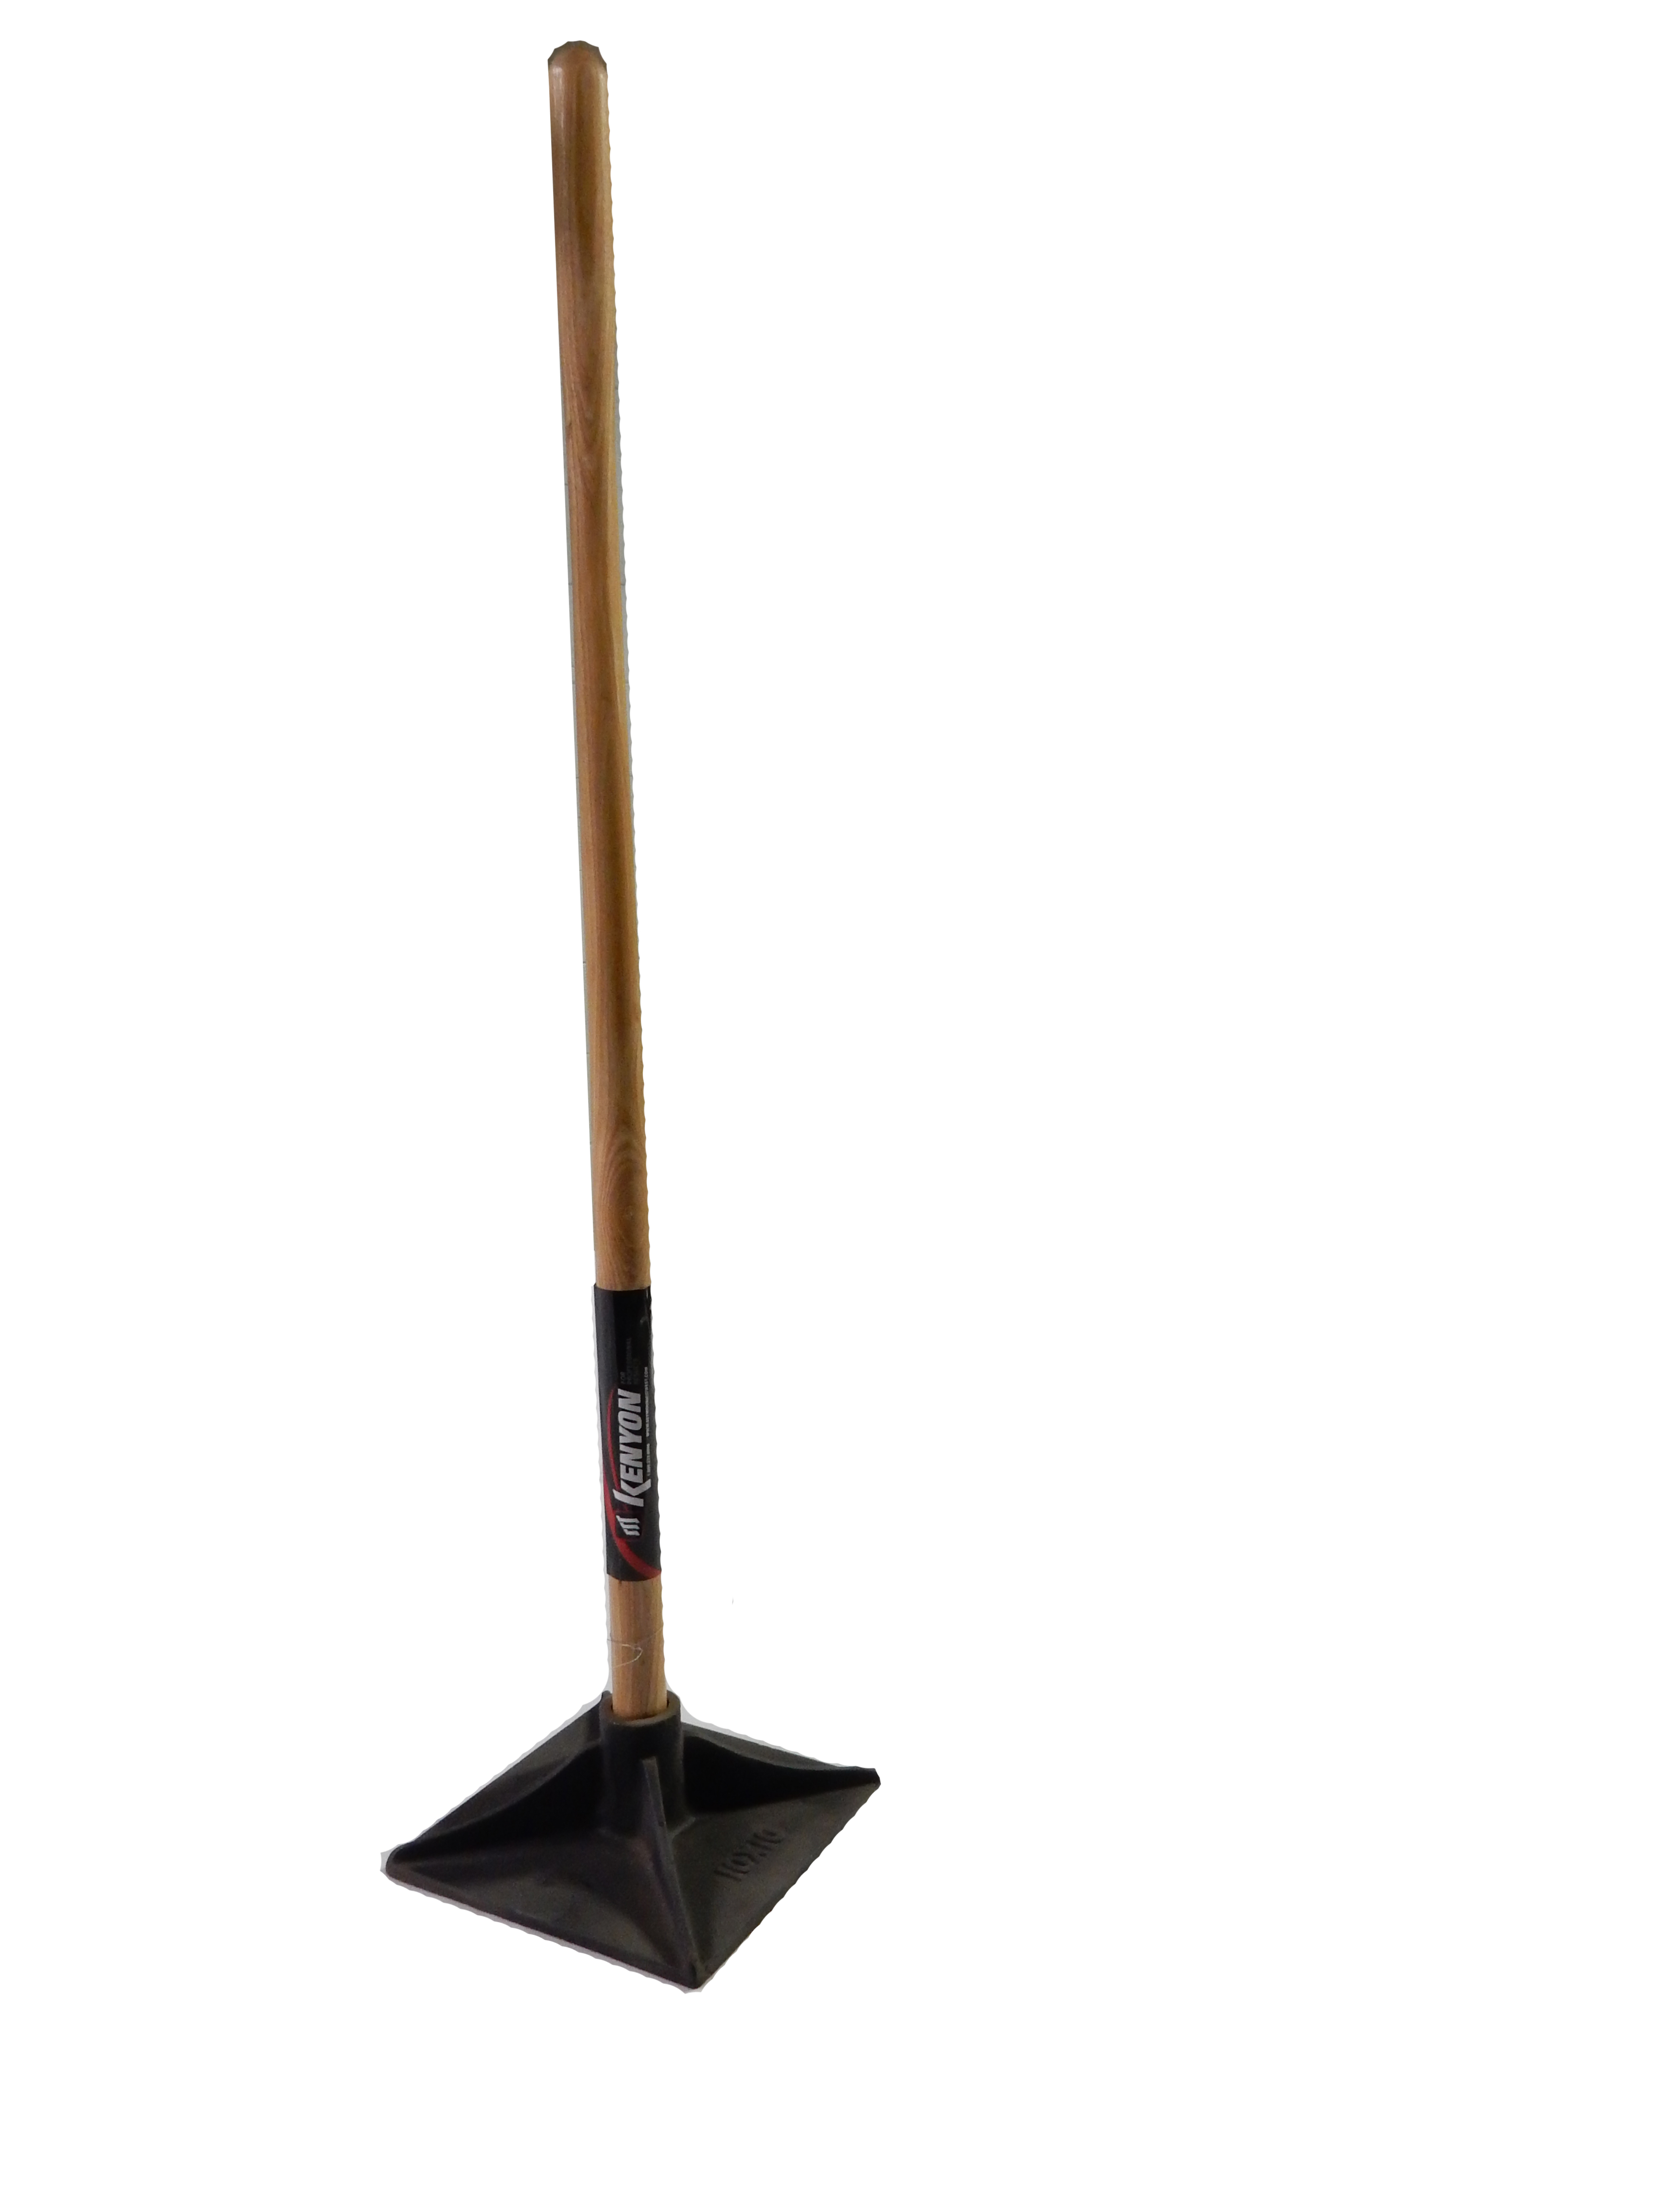 Tamper 10 Inch Cast Iron Head - 44 inch Handle - Axes, Picks & Hammers